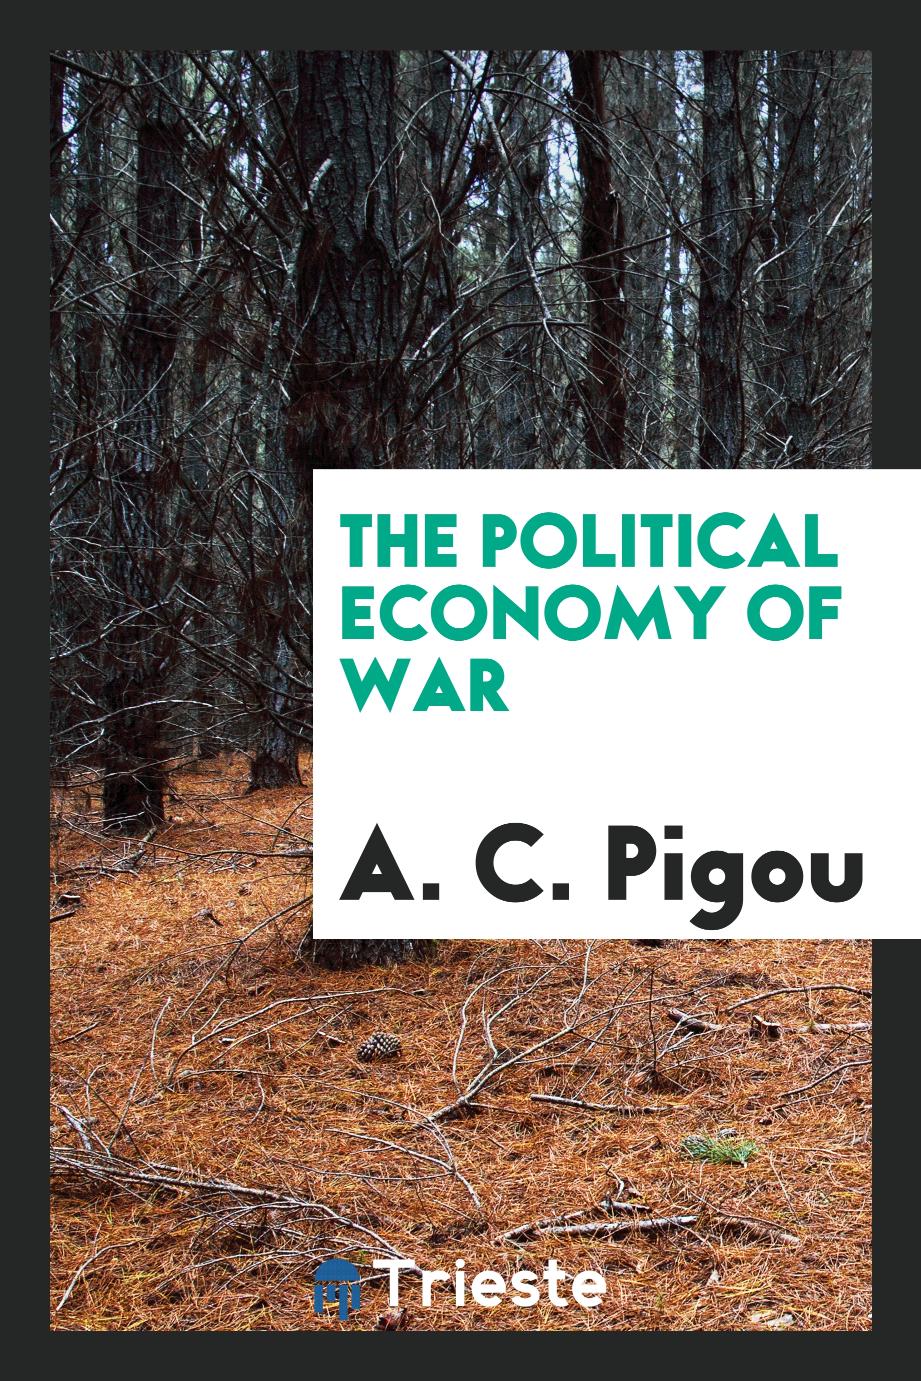 The political economy of war